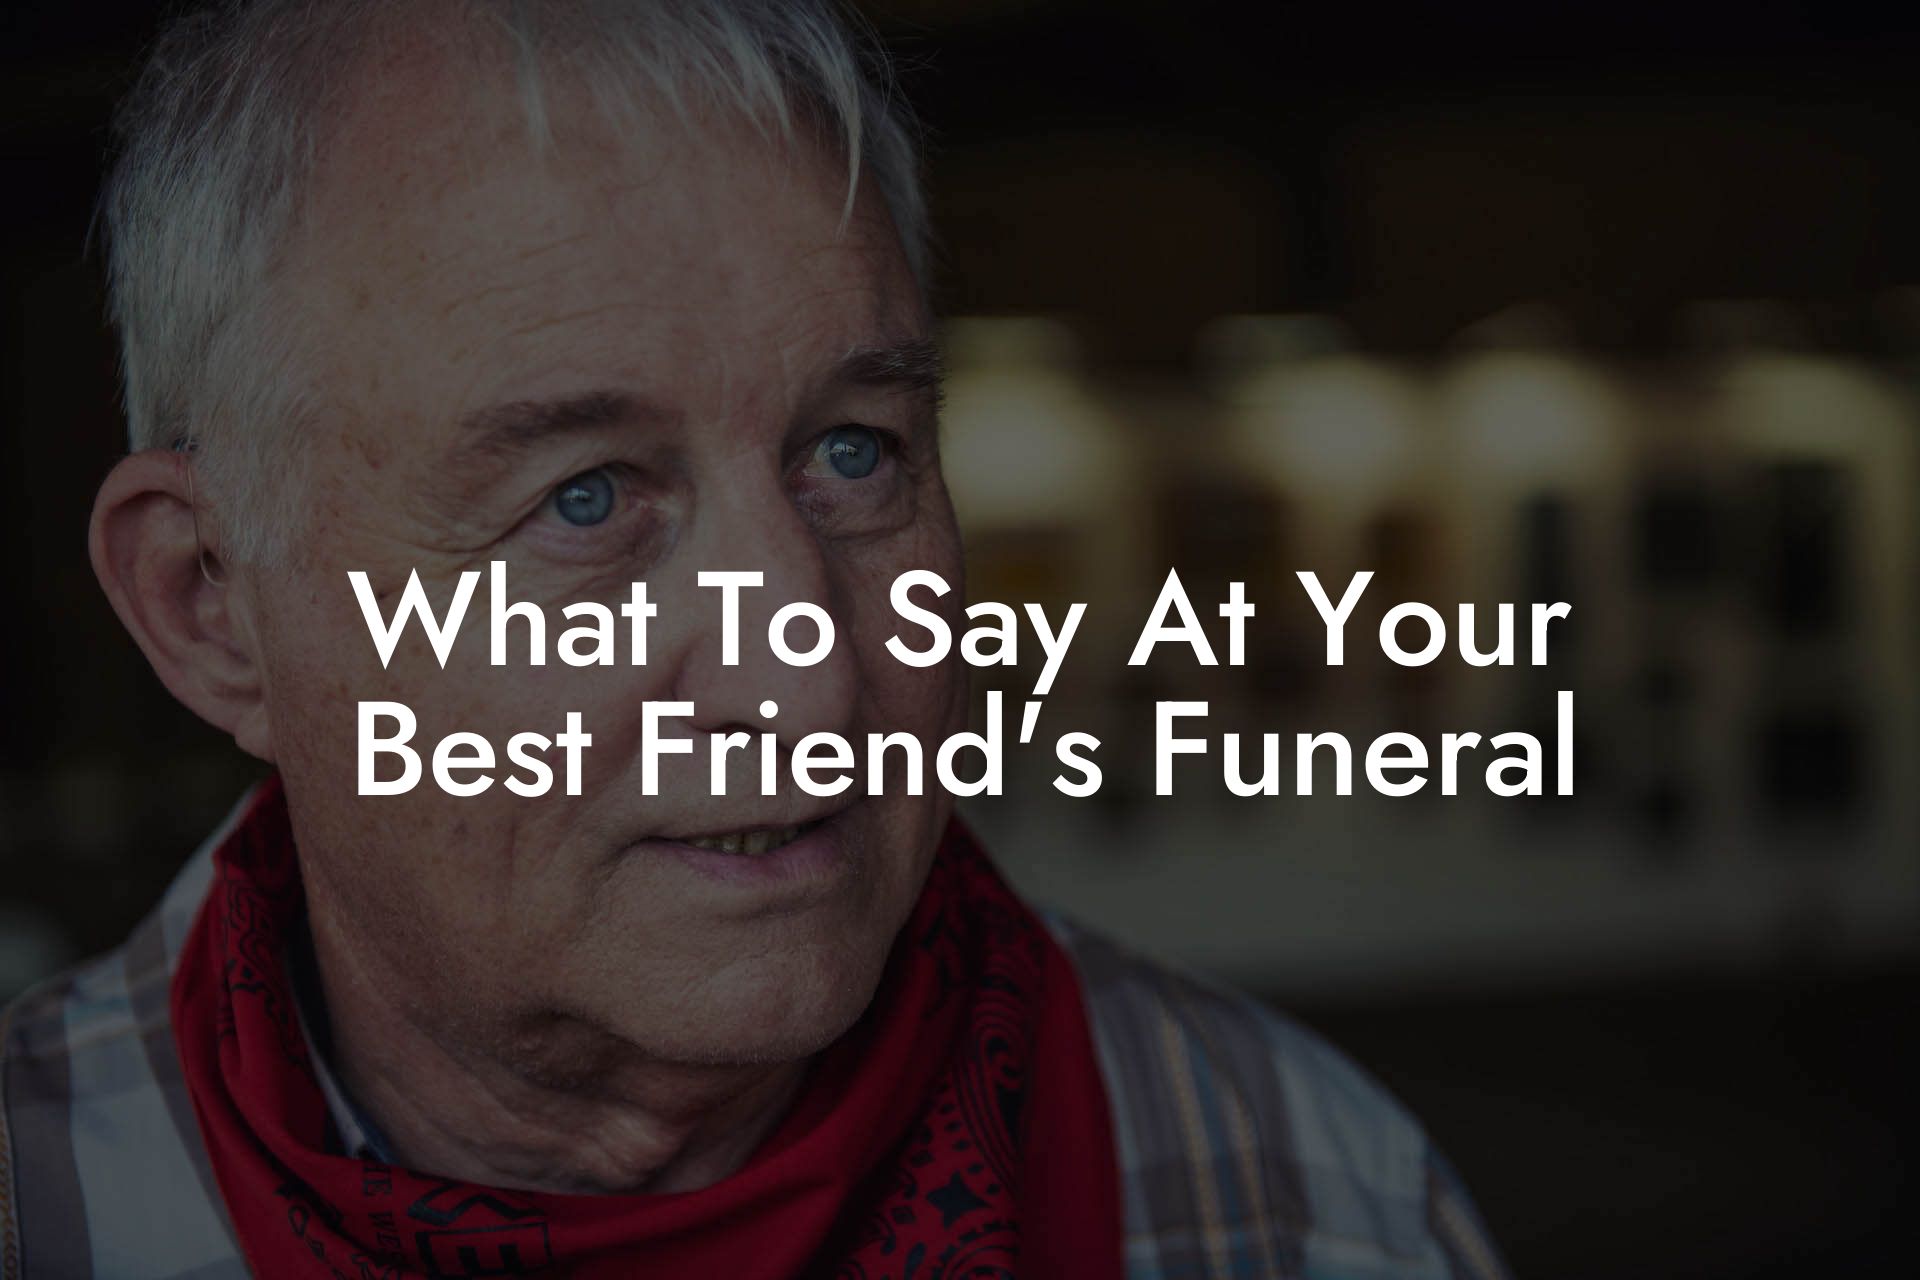 What To Say At Your Best Friend's Funeral